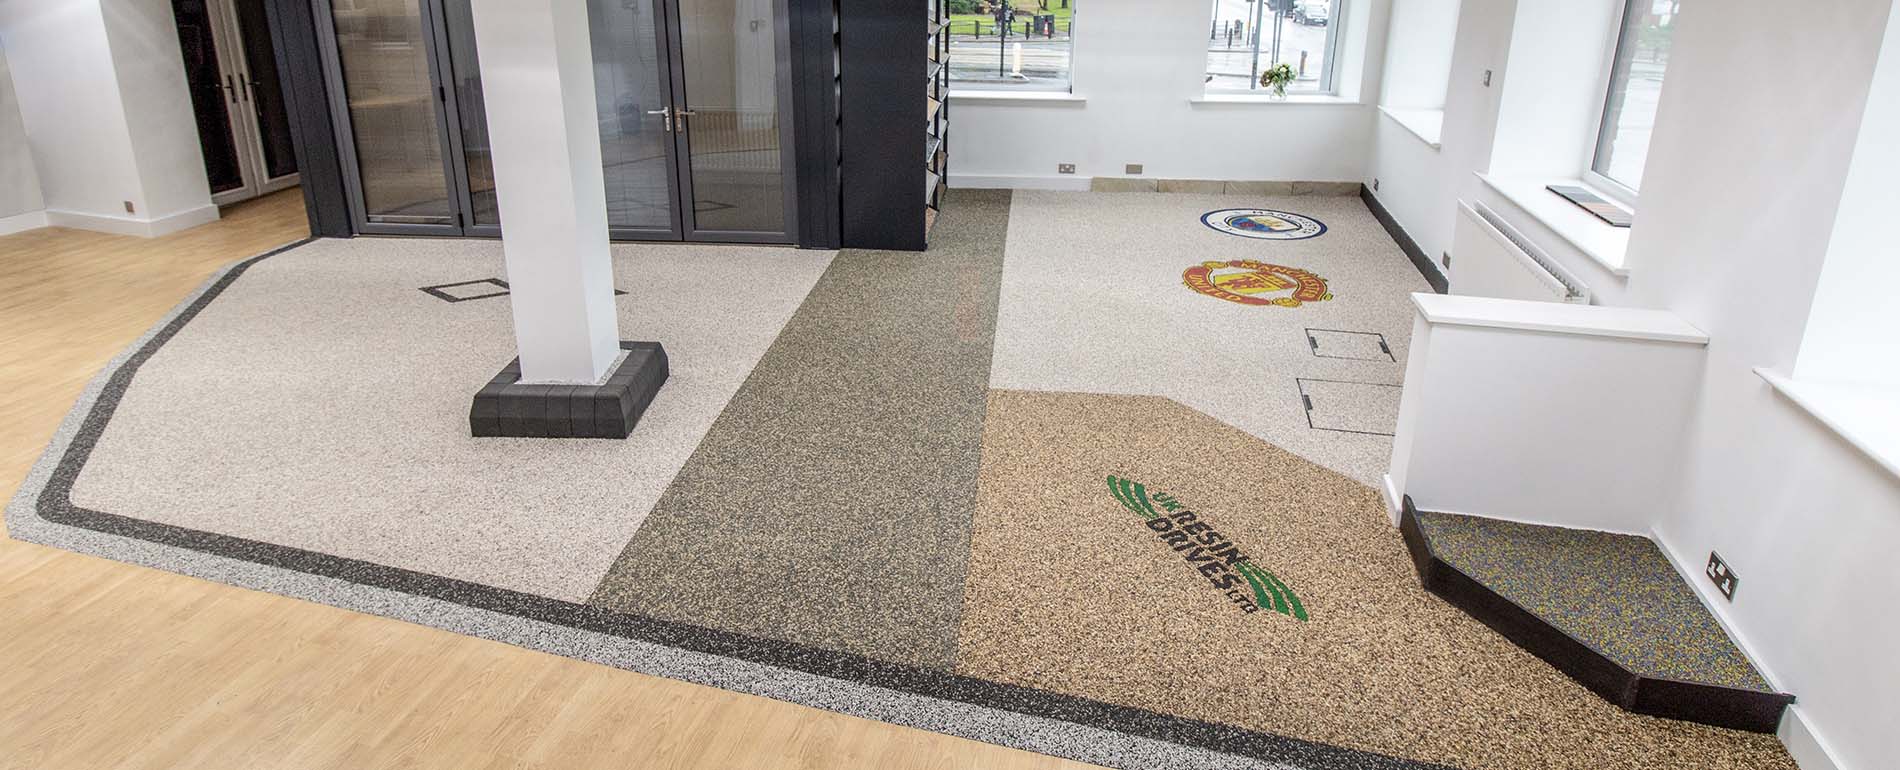 View Resin Driveway & Patio Examples in Our Showroom